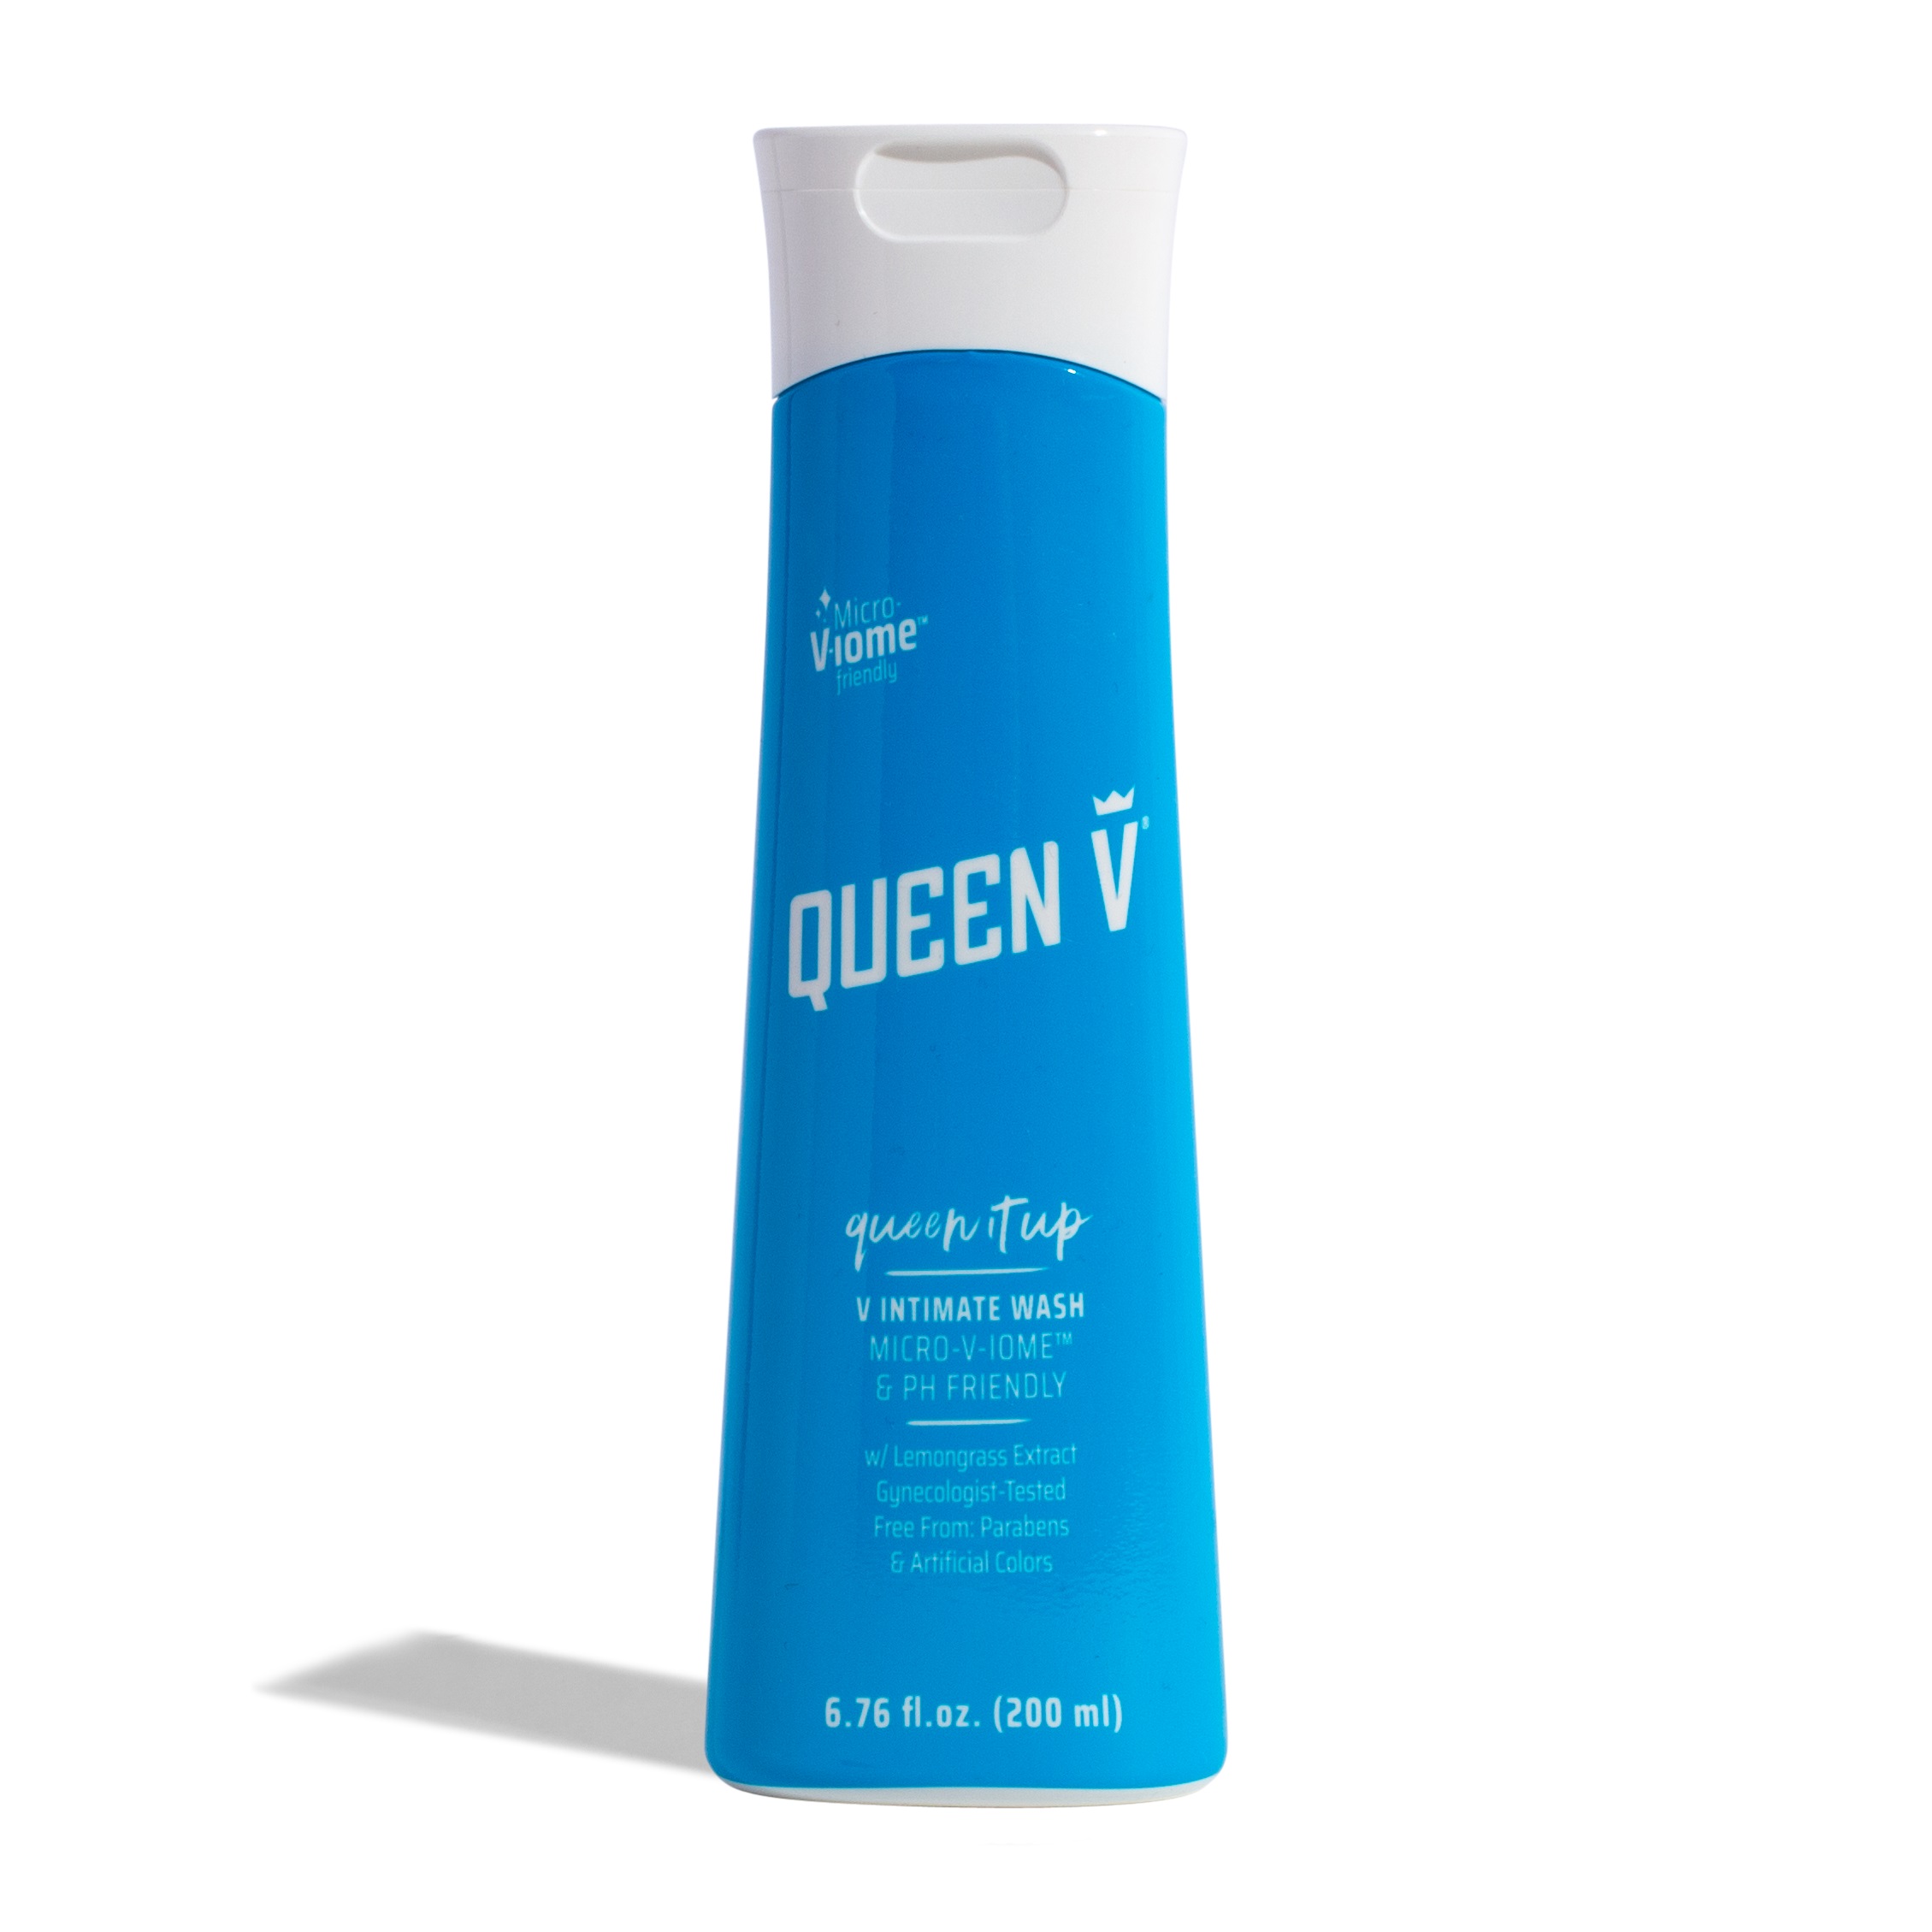 QUEEN V® Queen it Up - V Intimate Wash